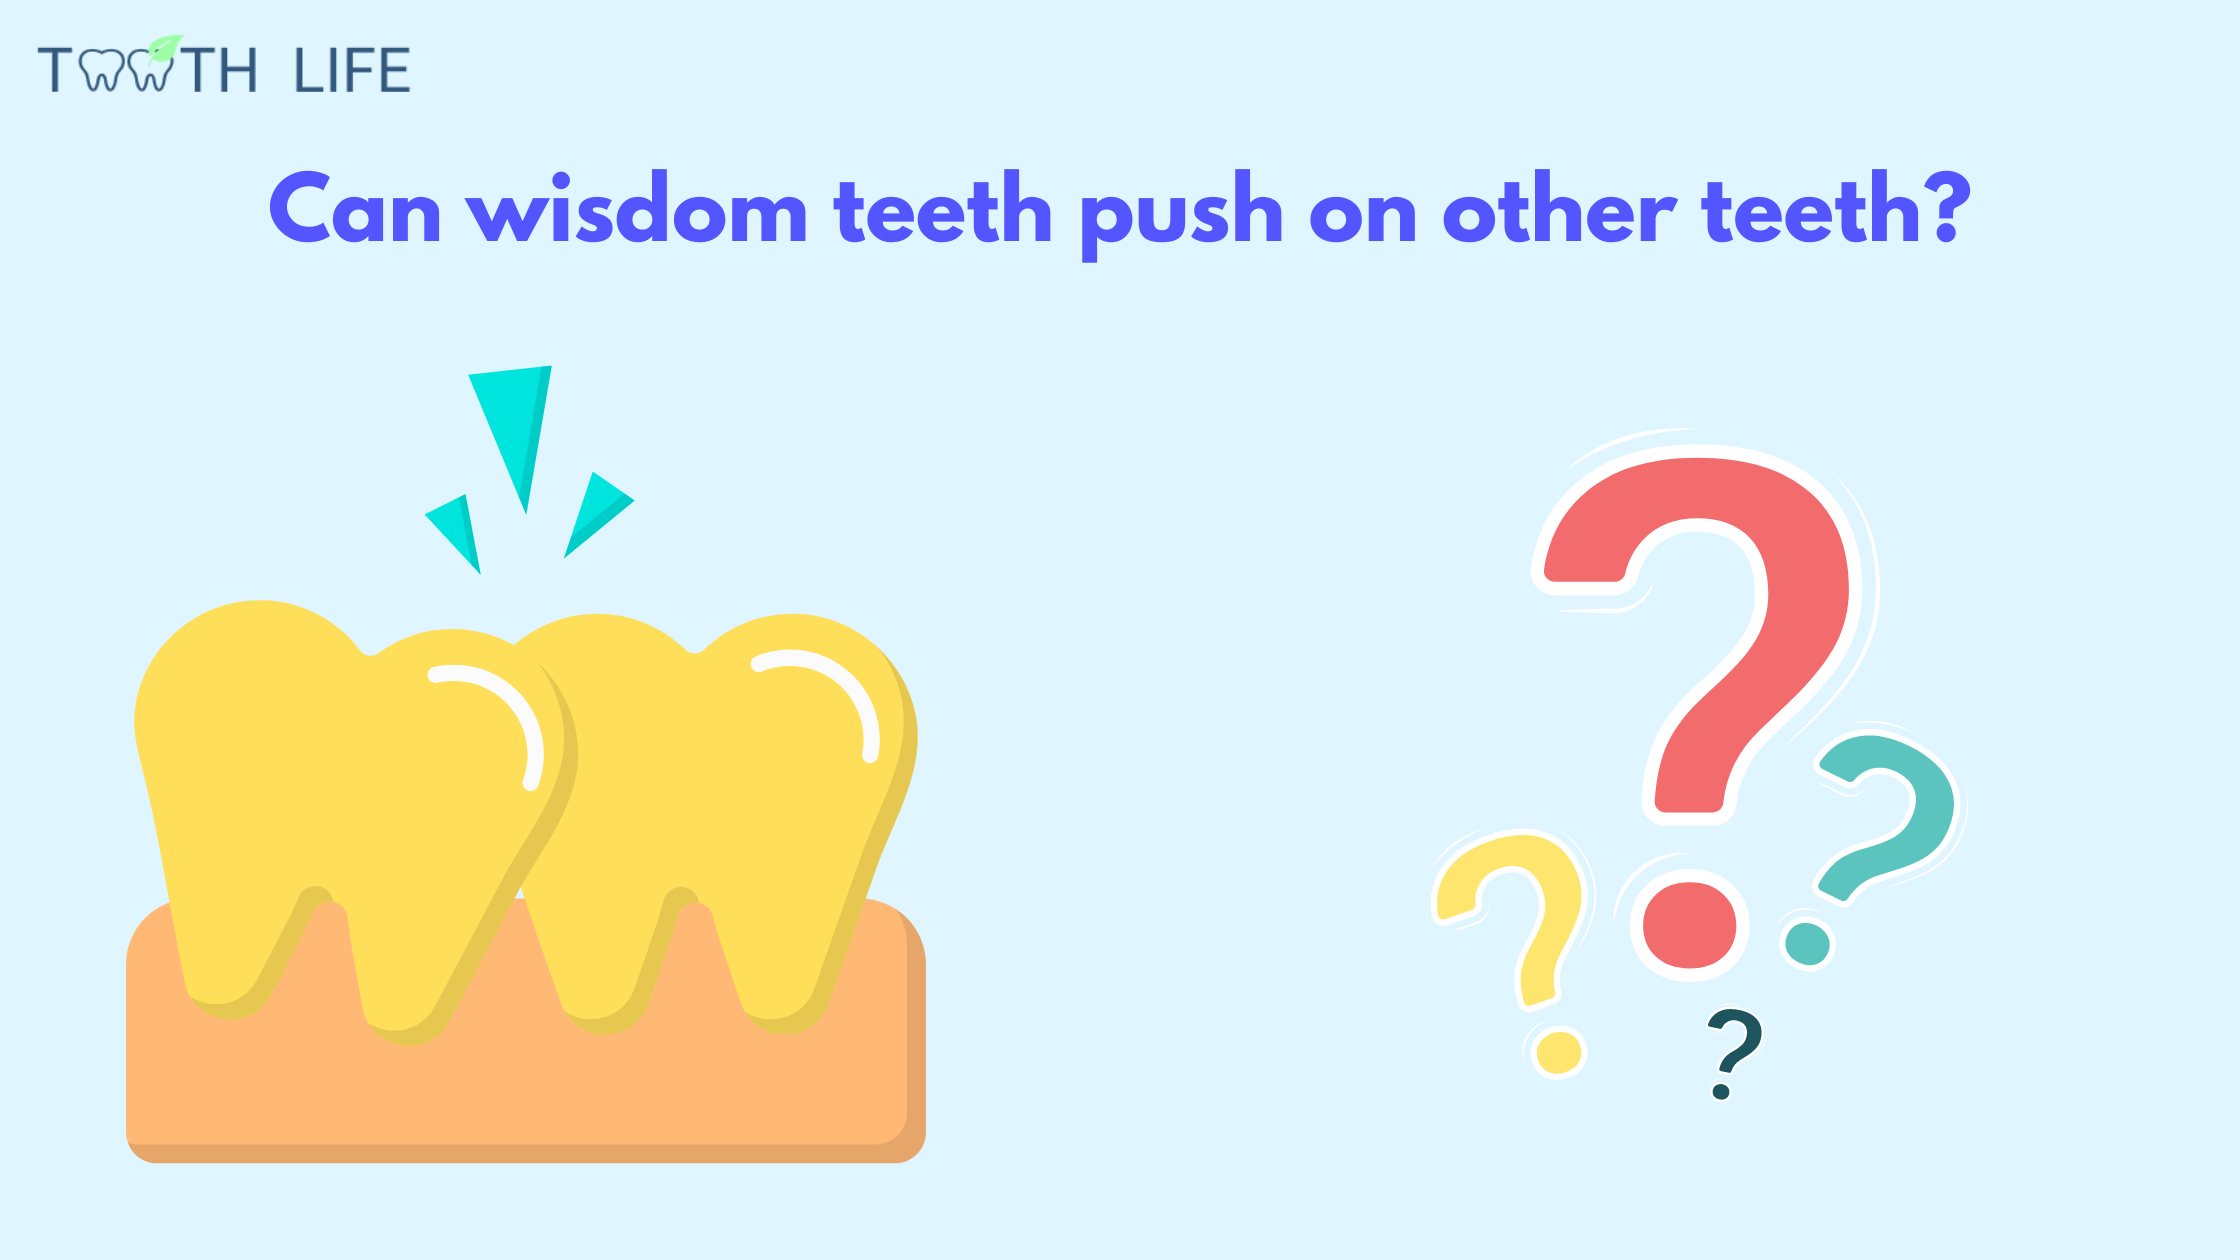 Can widom tooth push other teeth? 